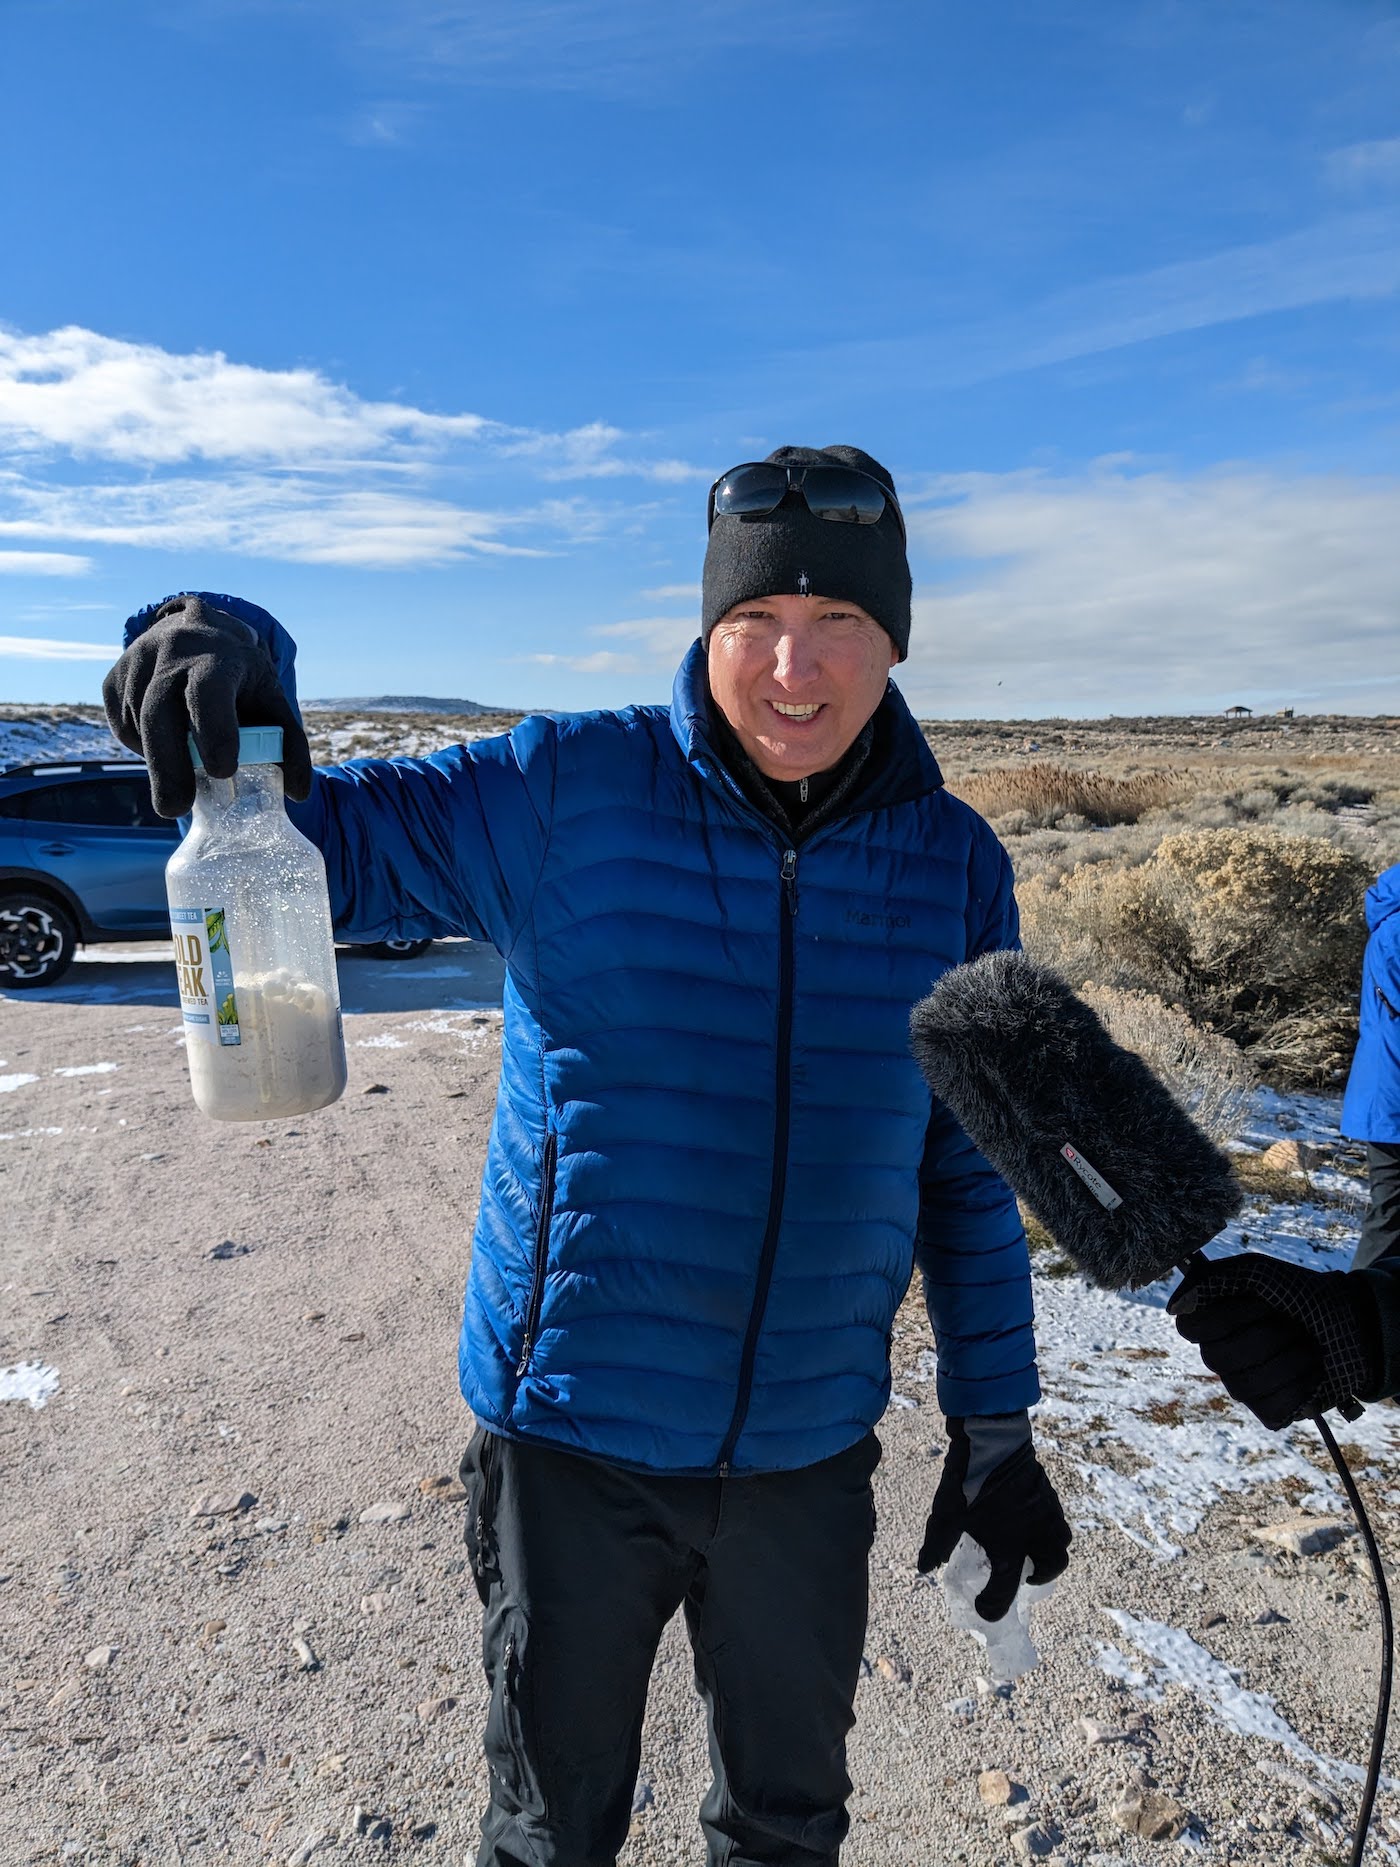 kevin perry with great salt lake salt, filling a bottle almost halfway.